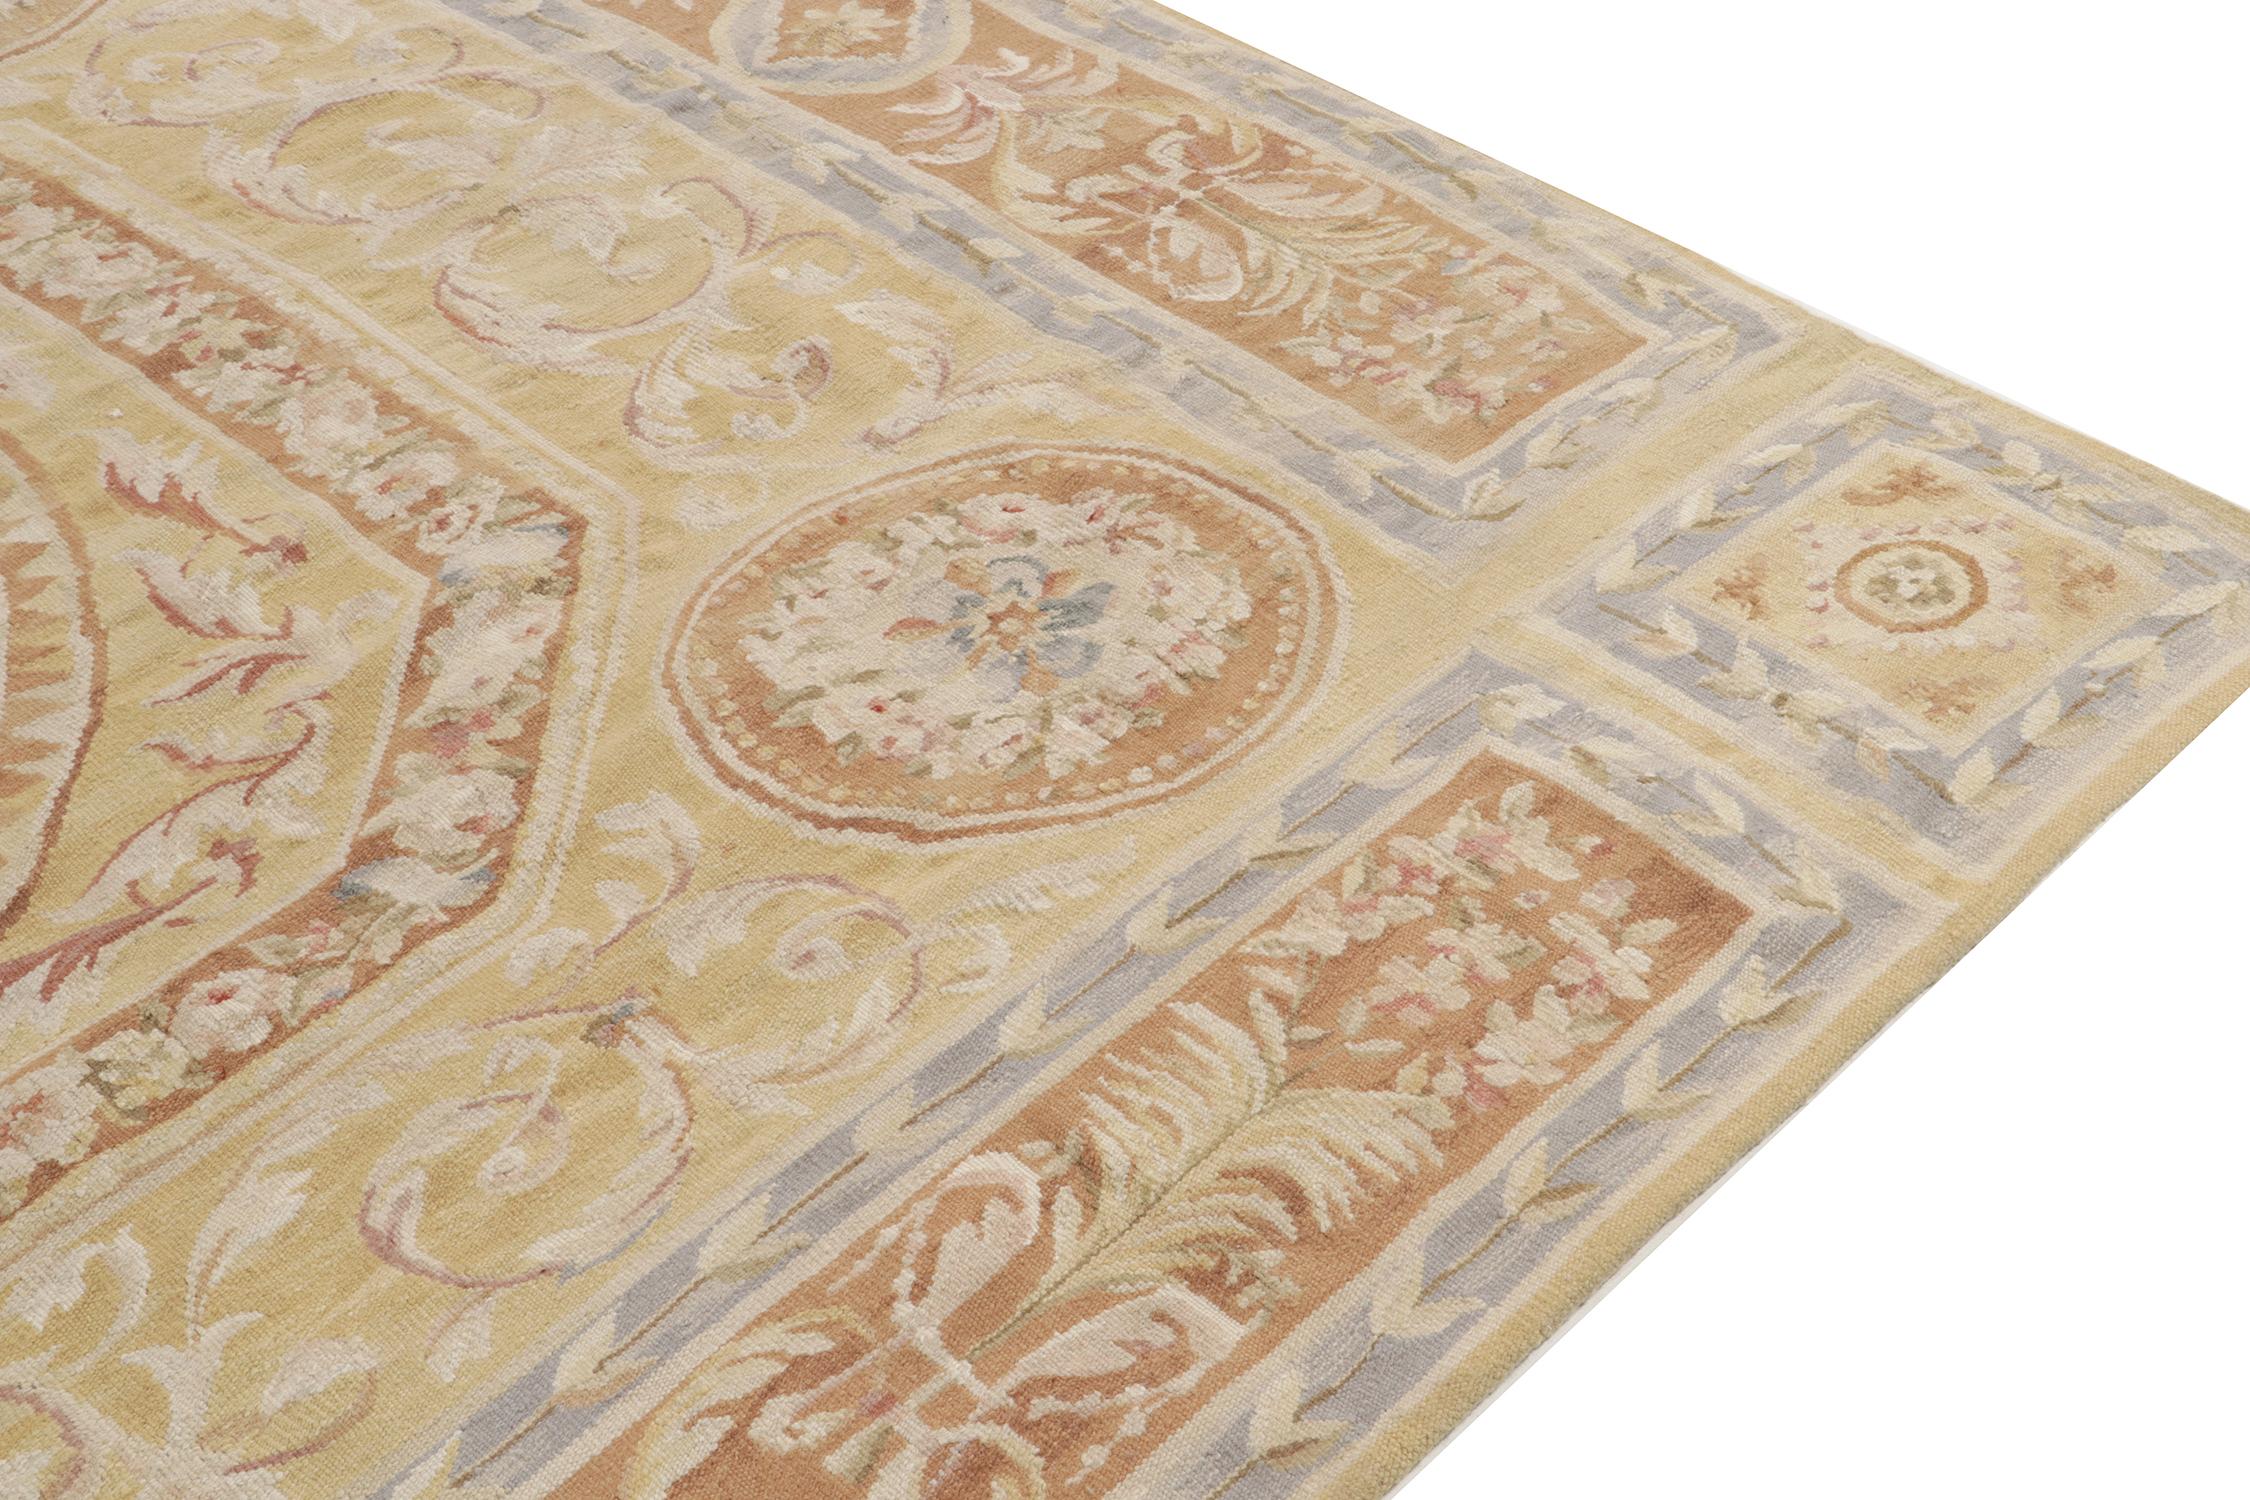 Hand-Knotted Rug & Kilim's Aubusson Style Flatweave Rug in Gold, Beige-Brown & Blue Florals For Sale